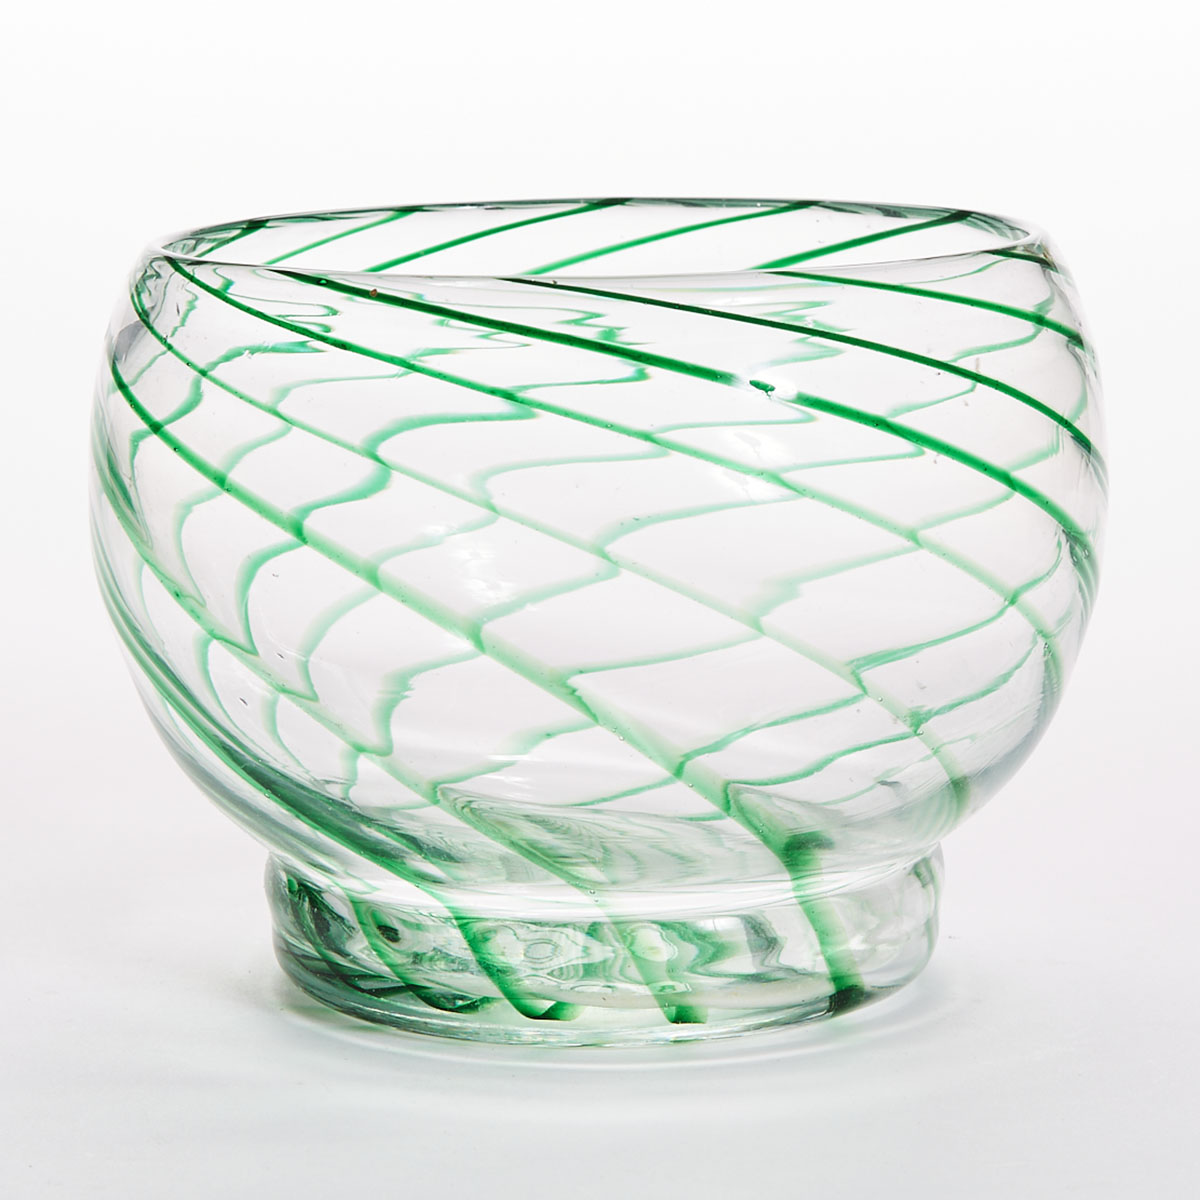 English Green Spiral Decorated Glass Bowl, possibly Stevens & Williams, early 20th century